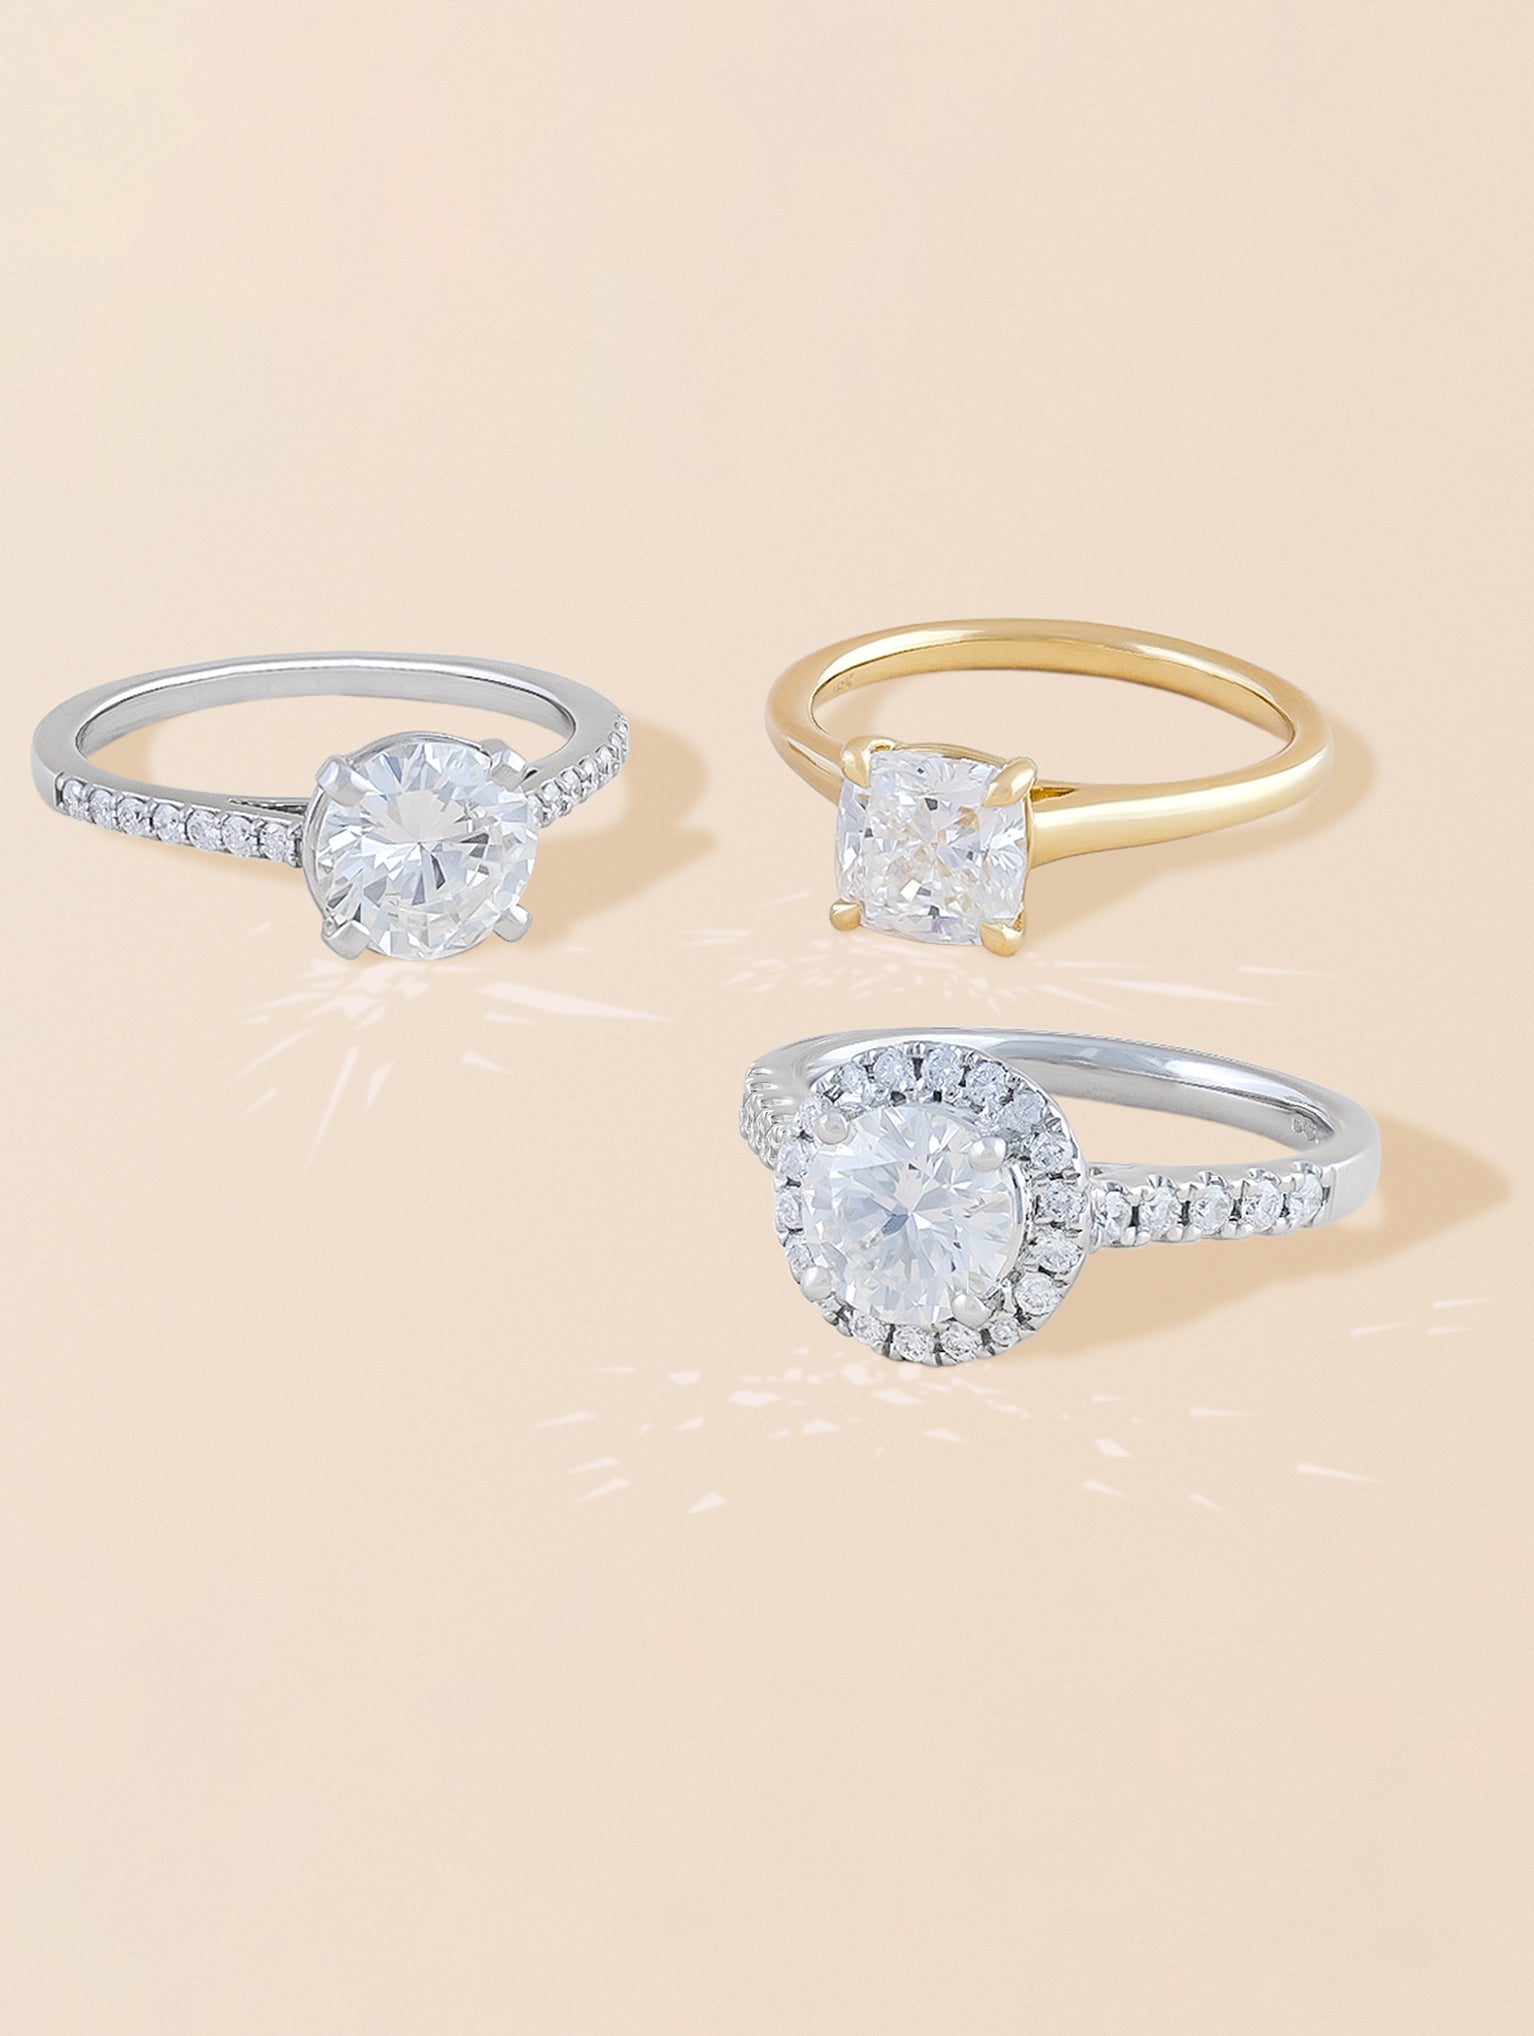 Ethical Engagement Rings - Buying Guide